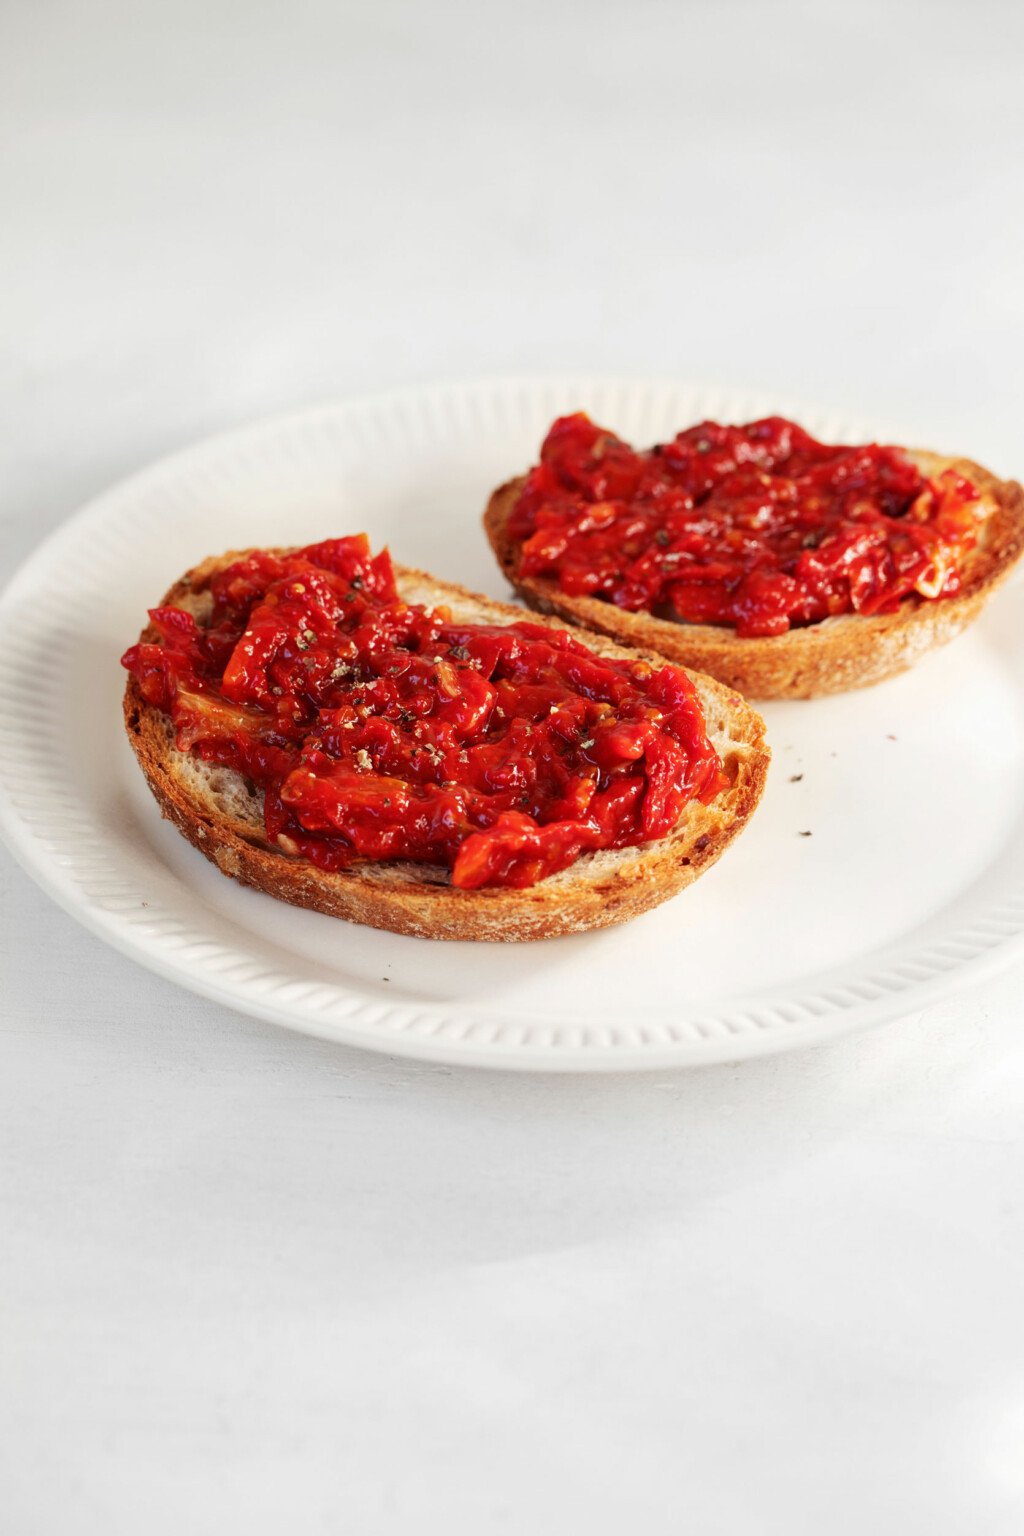 Two oval-shaped slices of toast are topped with a bright red cherry tomato jam.